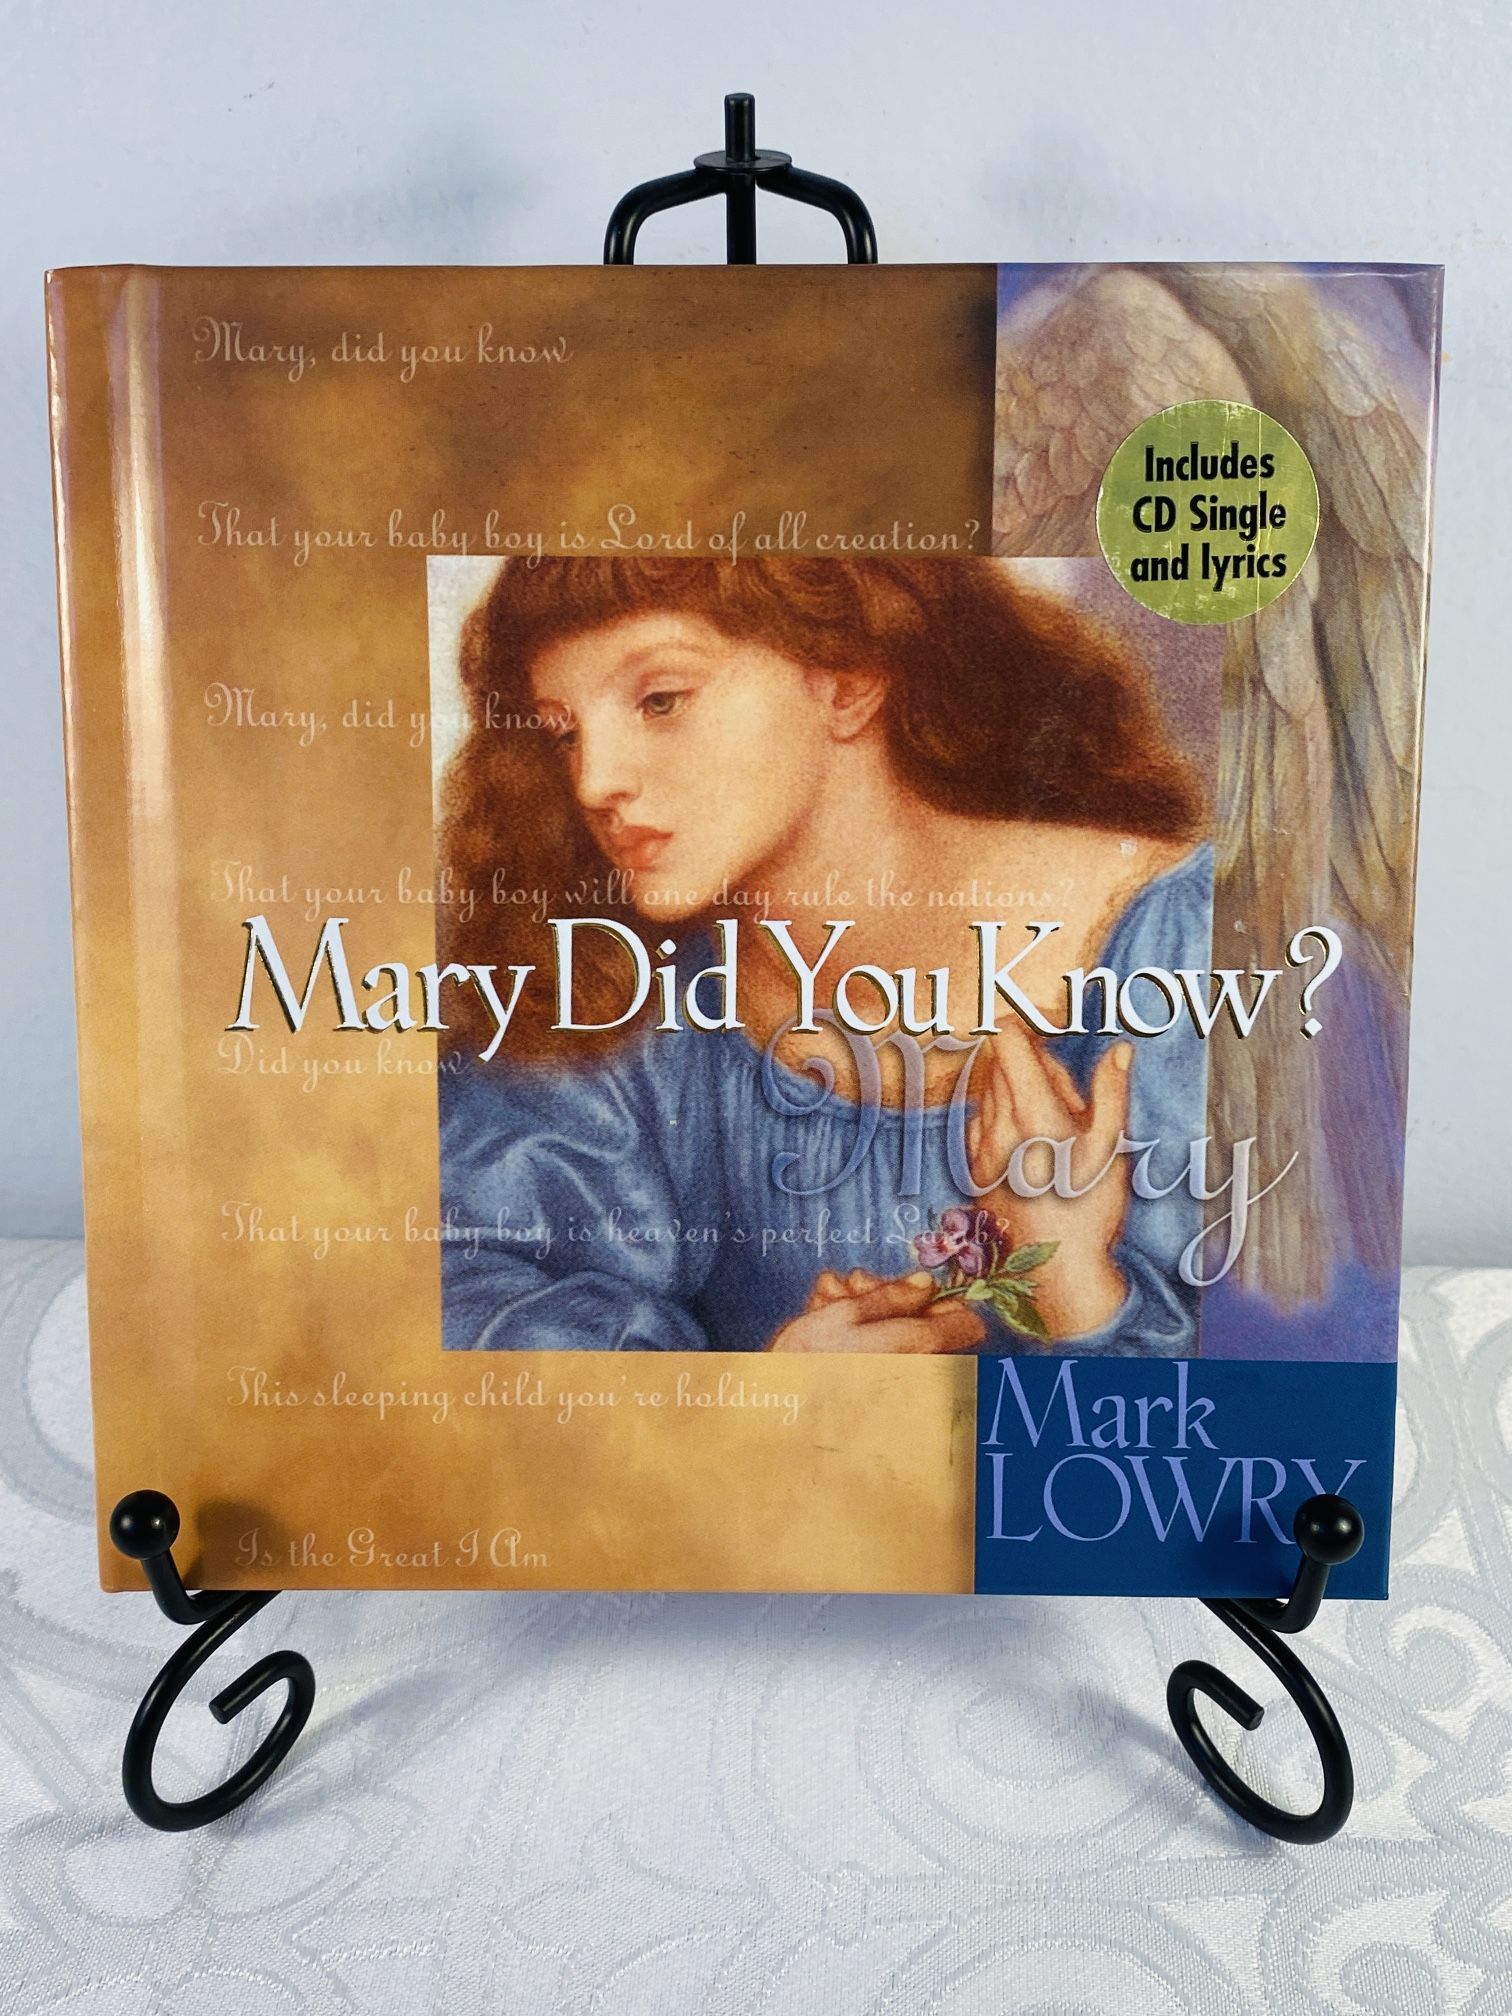 NEW BOOK + CD “Mary, Did You Know?” Mark Lowry 1998 